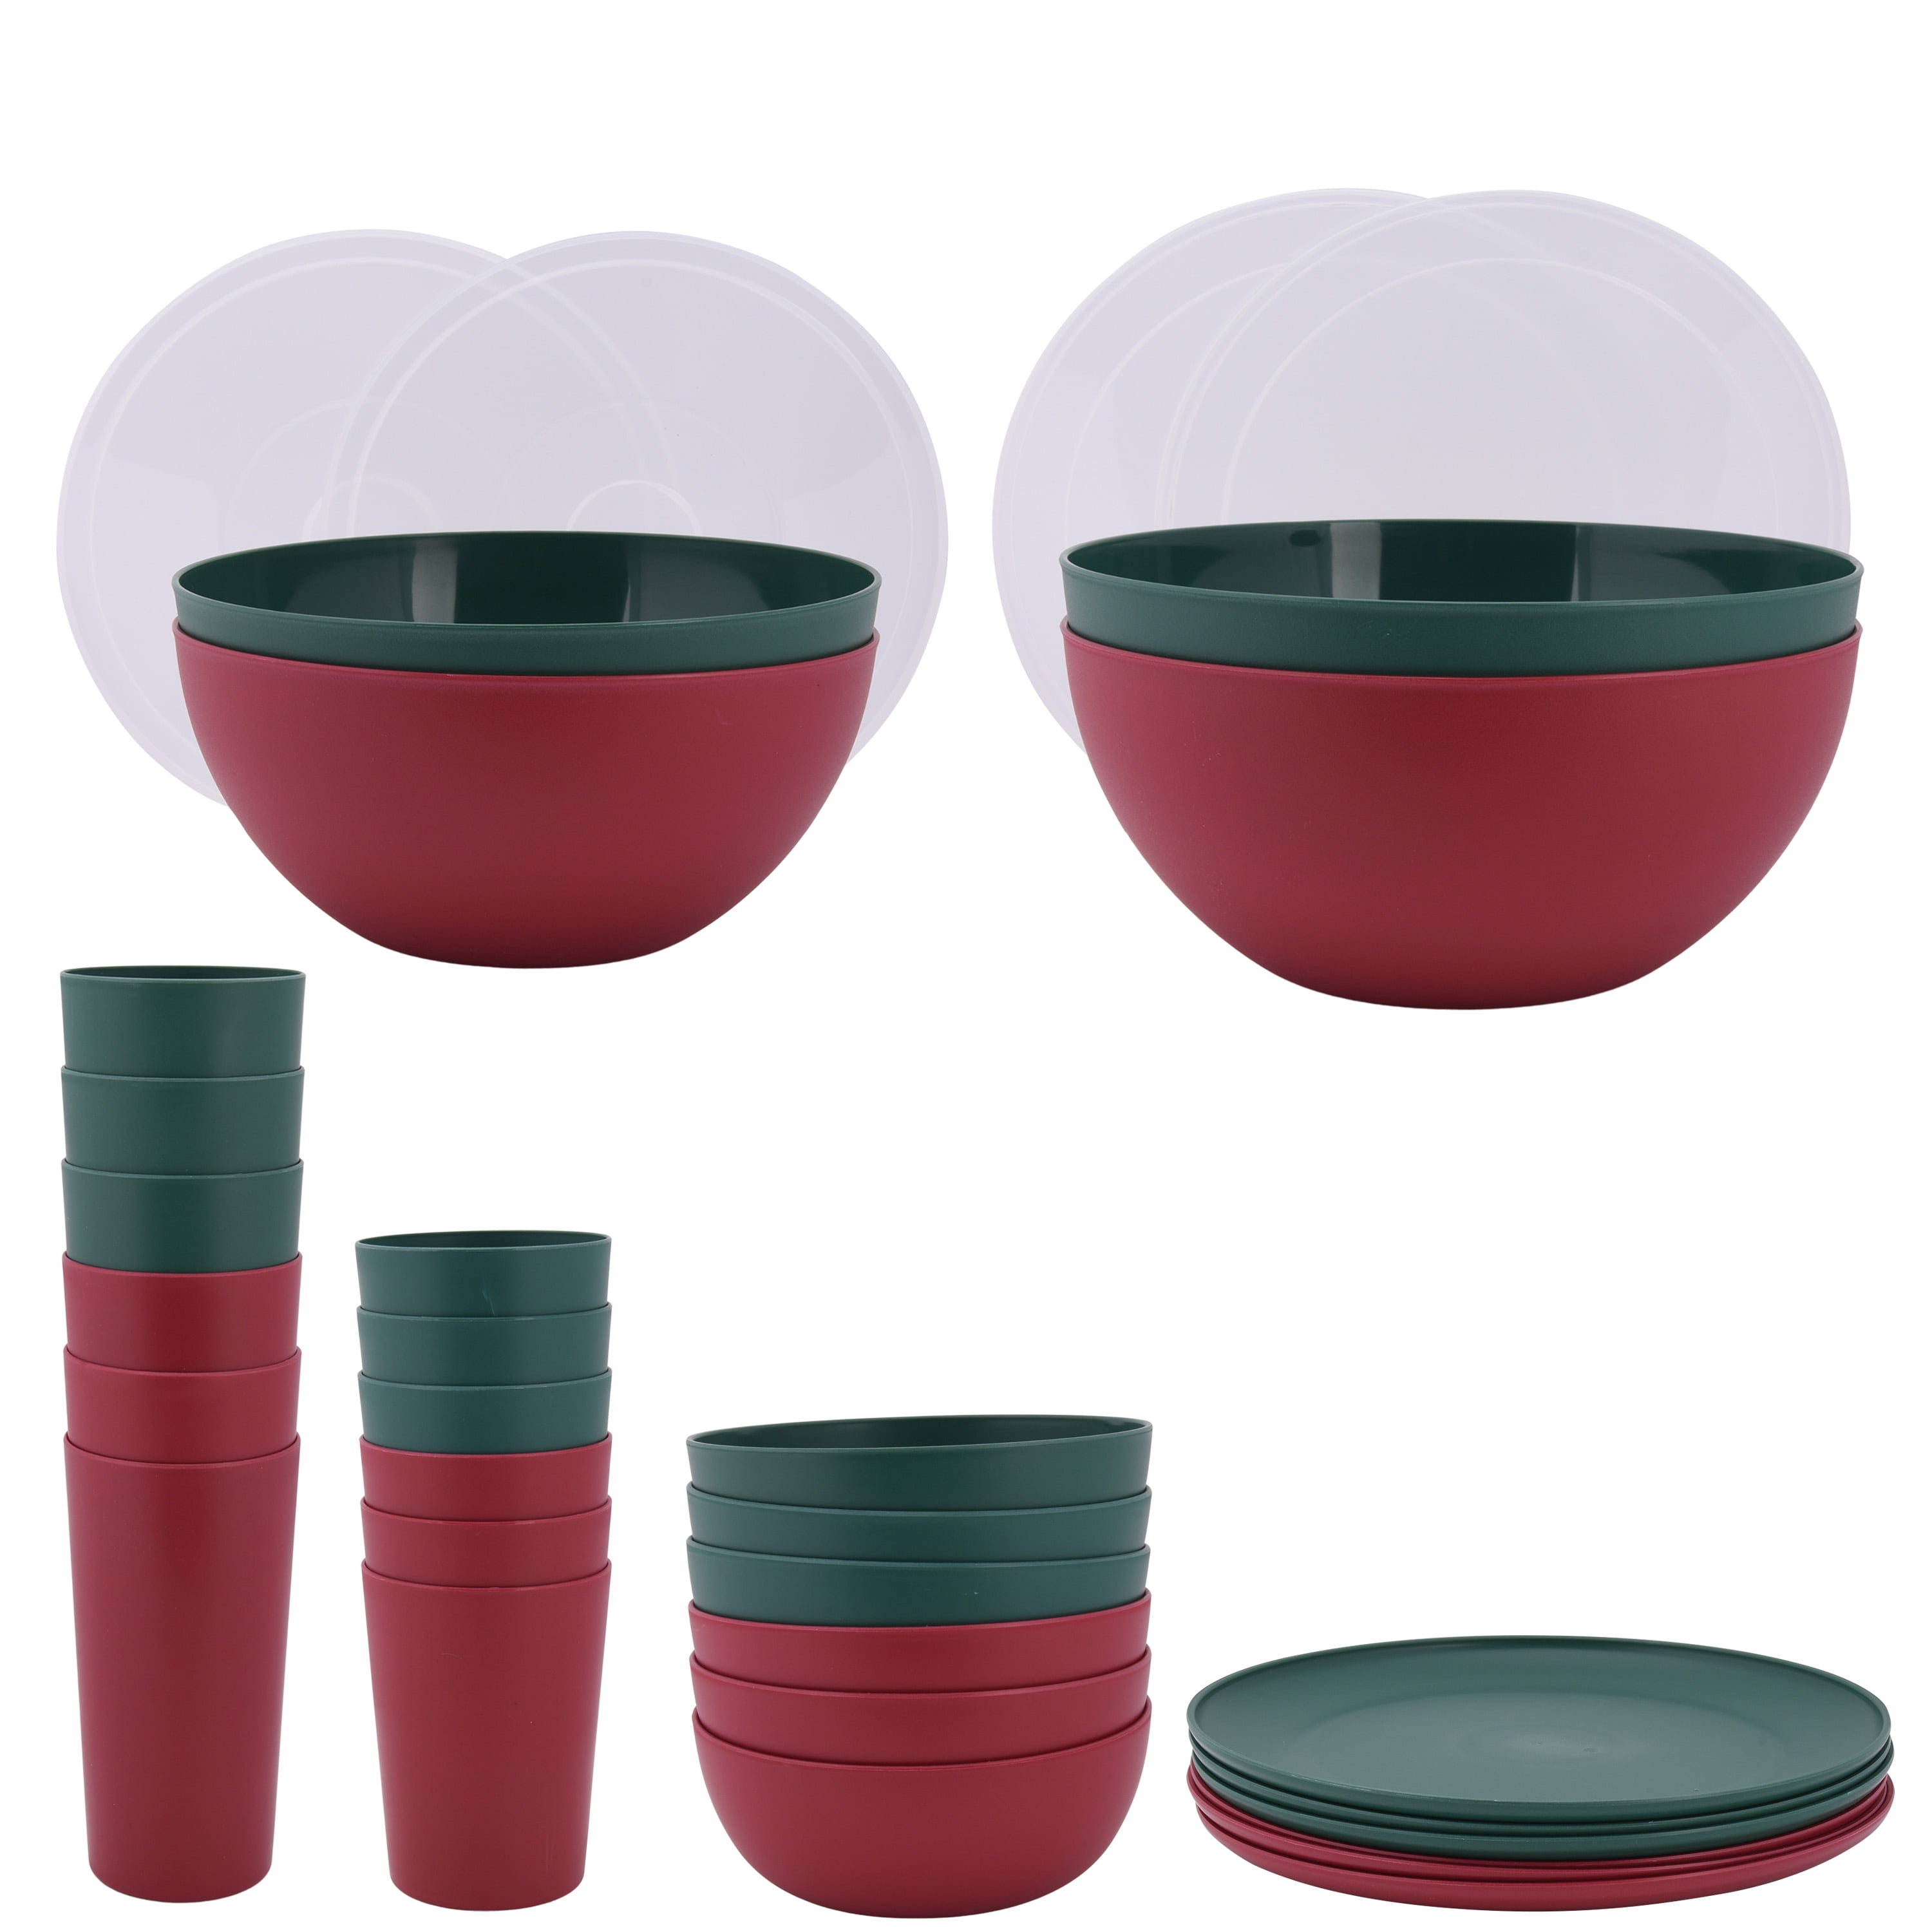 Mainstays Plastic Serving Bowls with Lids Round, Set Of 4, Dark Red &  Green, NEW